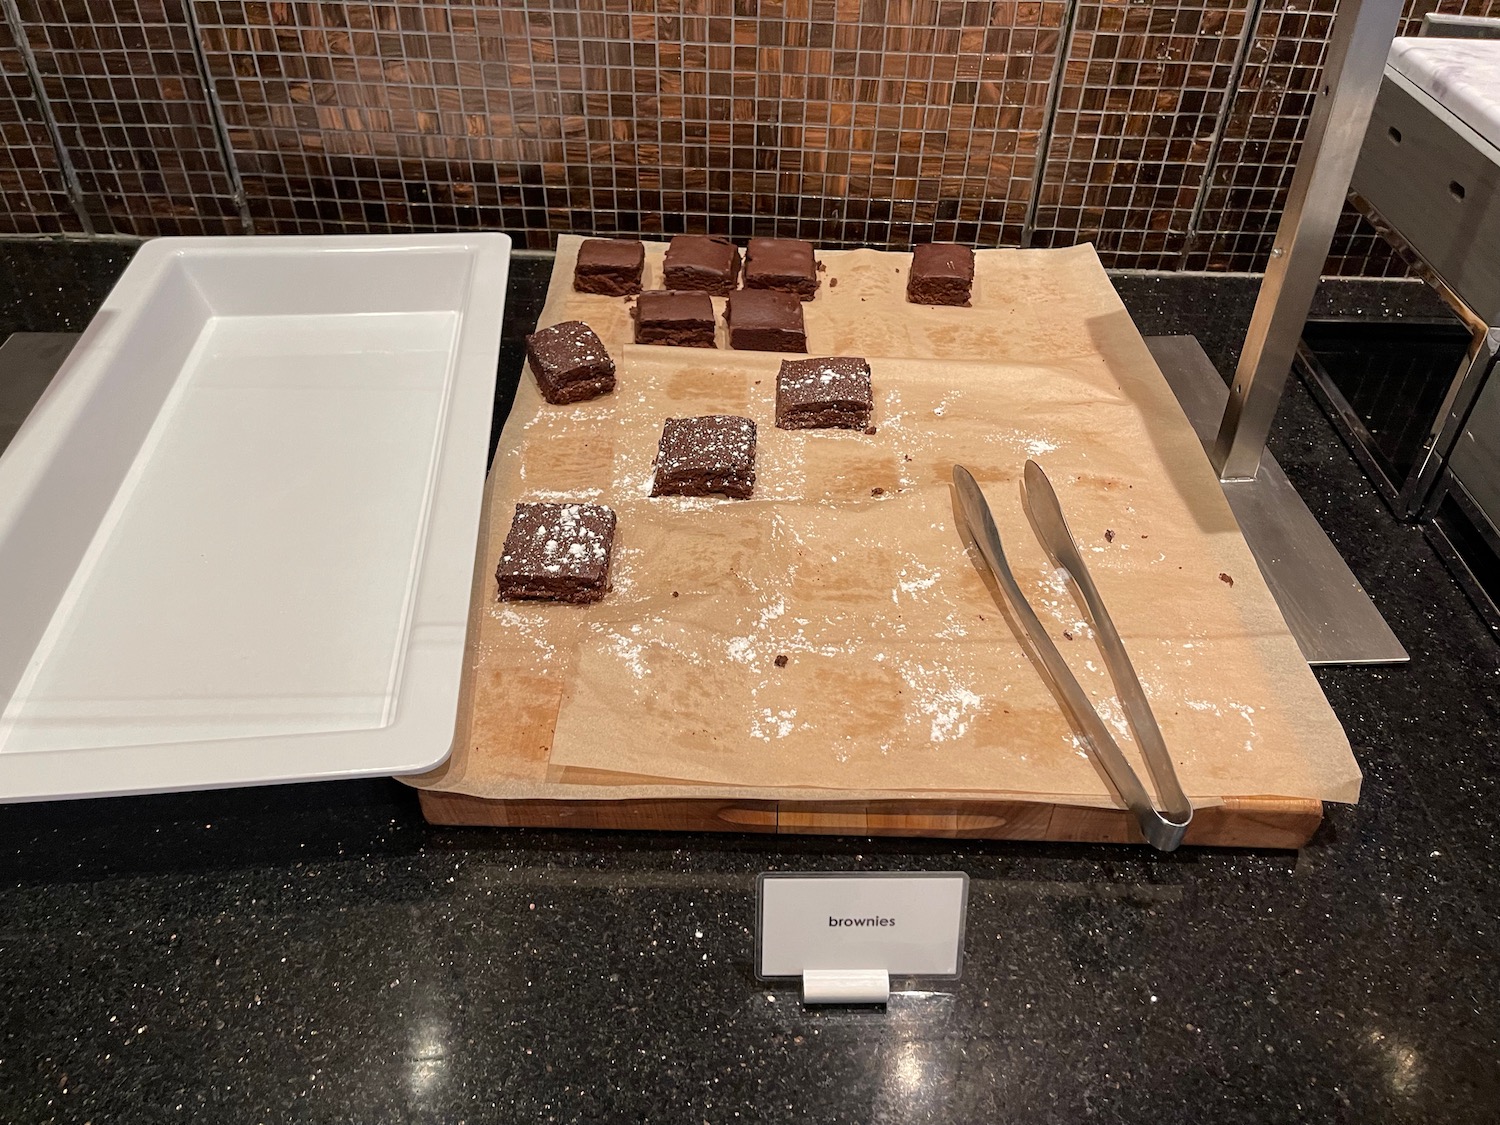 brownies on a cutting board with a tray of food